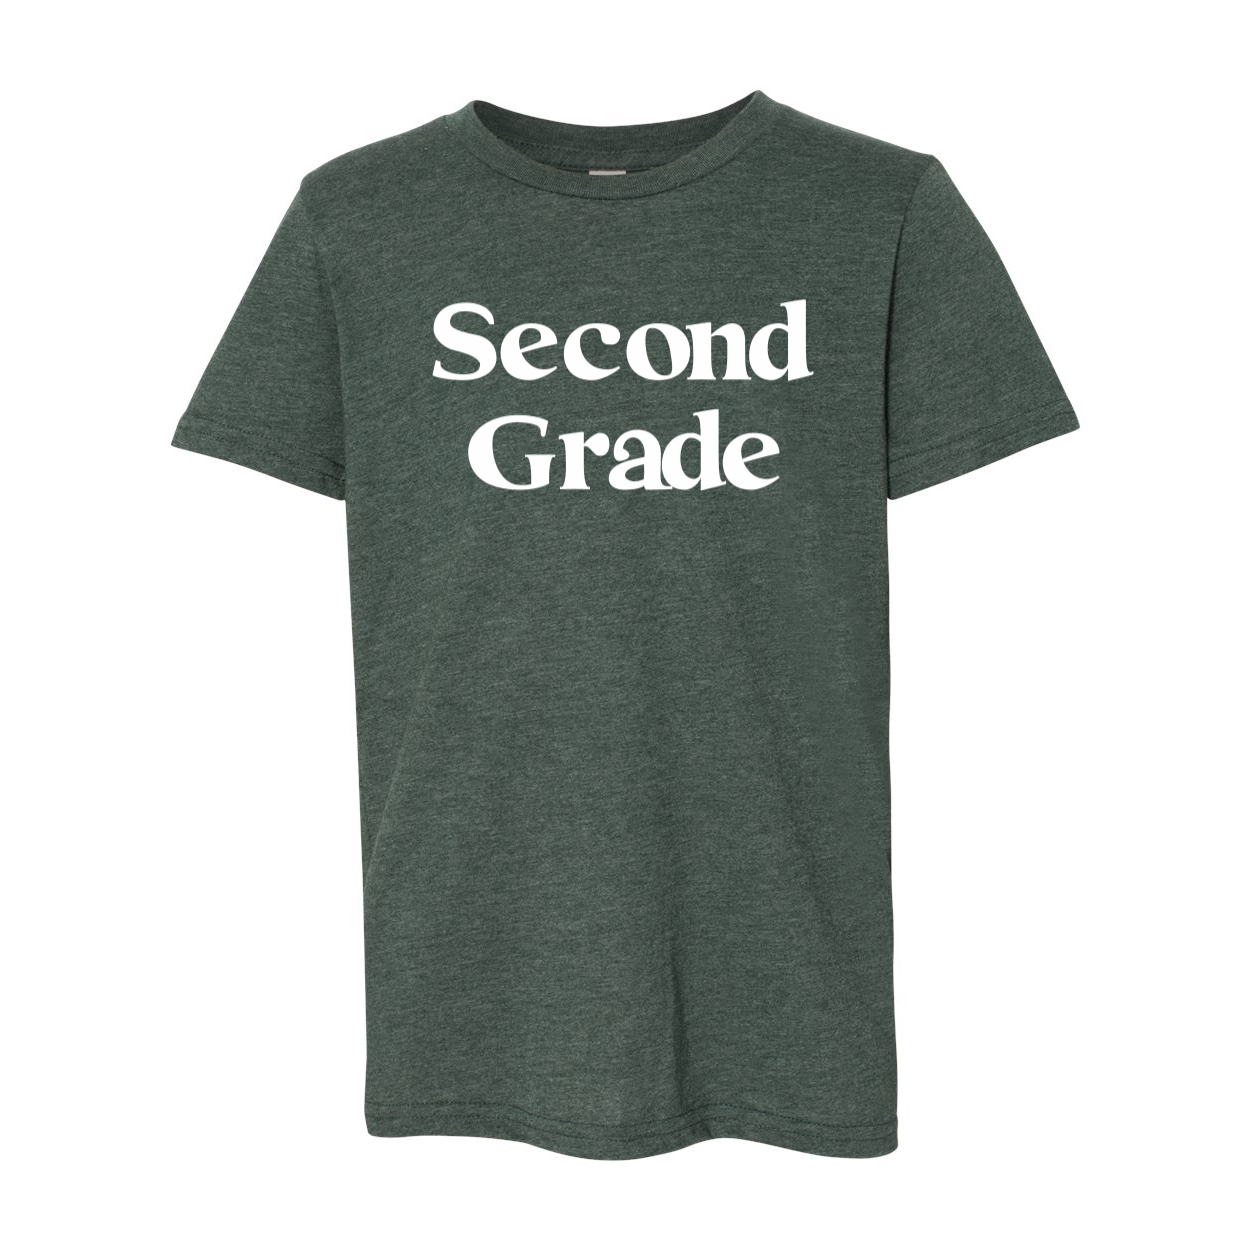 Second Grade YOUTH Print Soft Tee